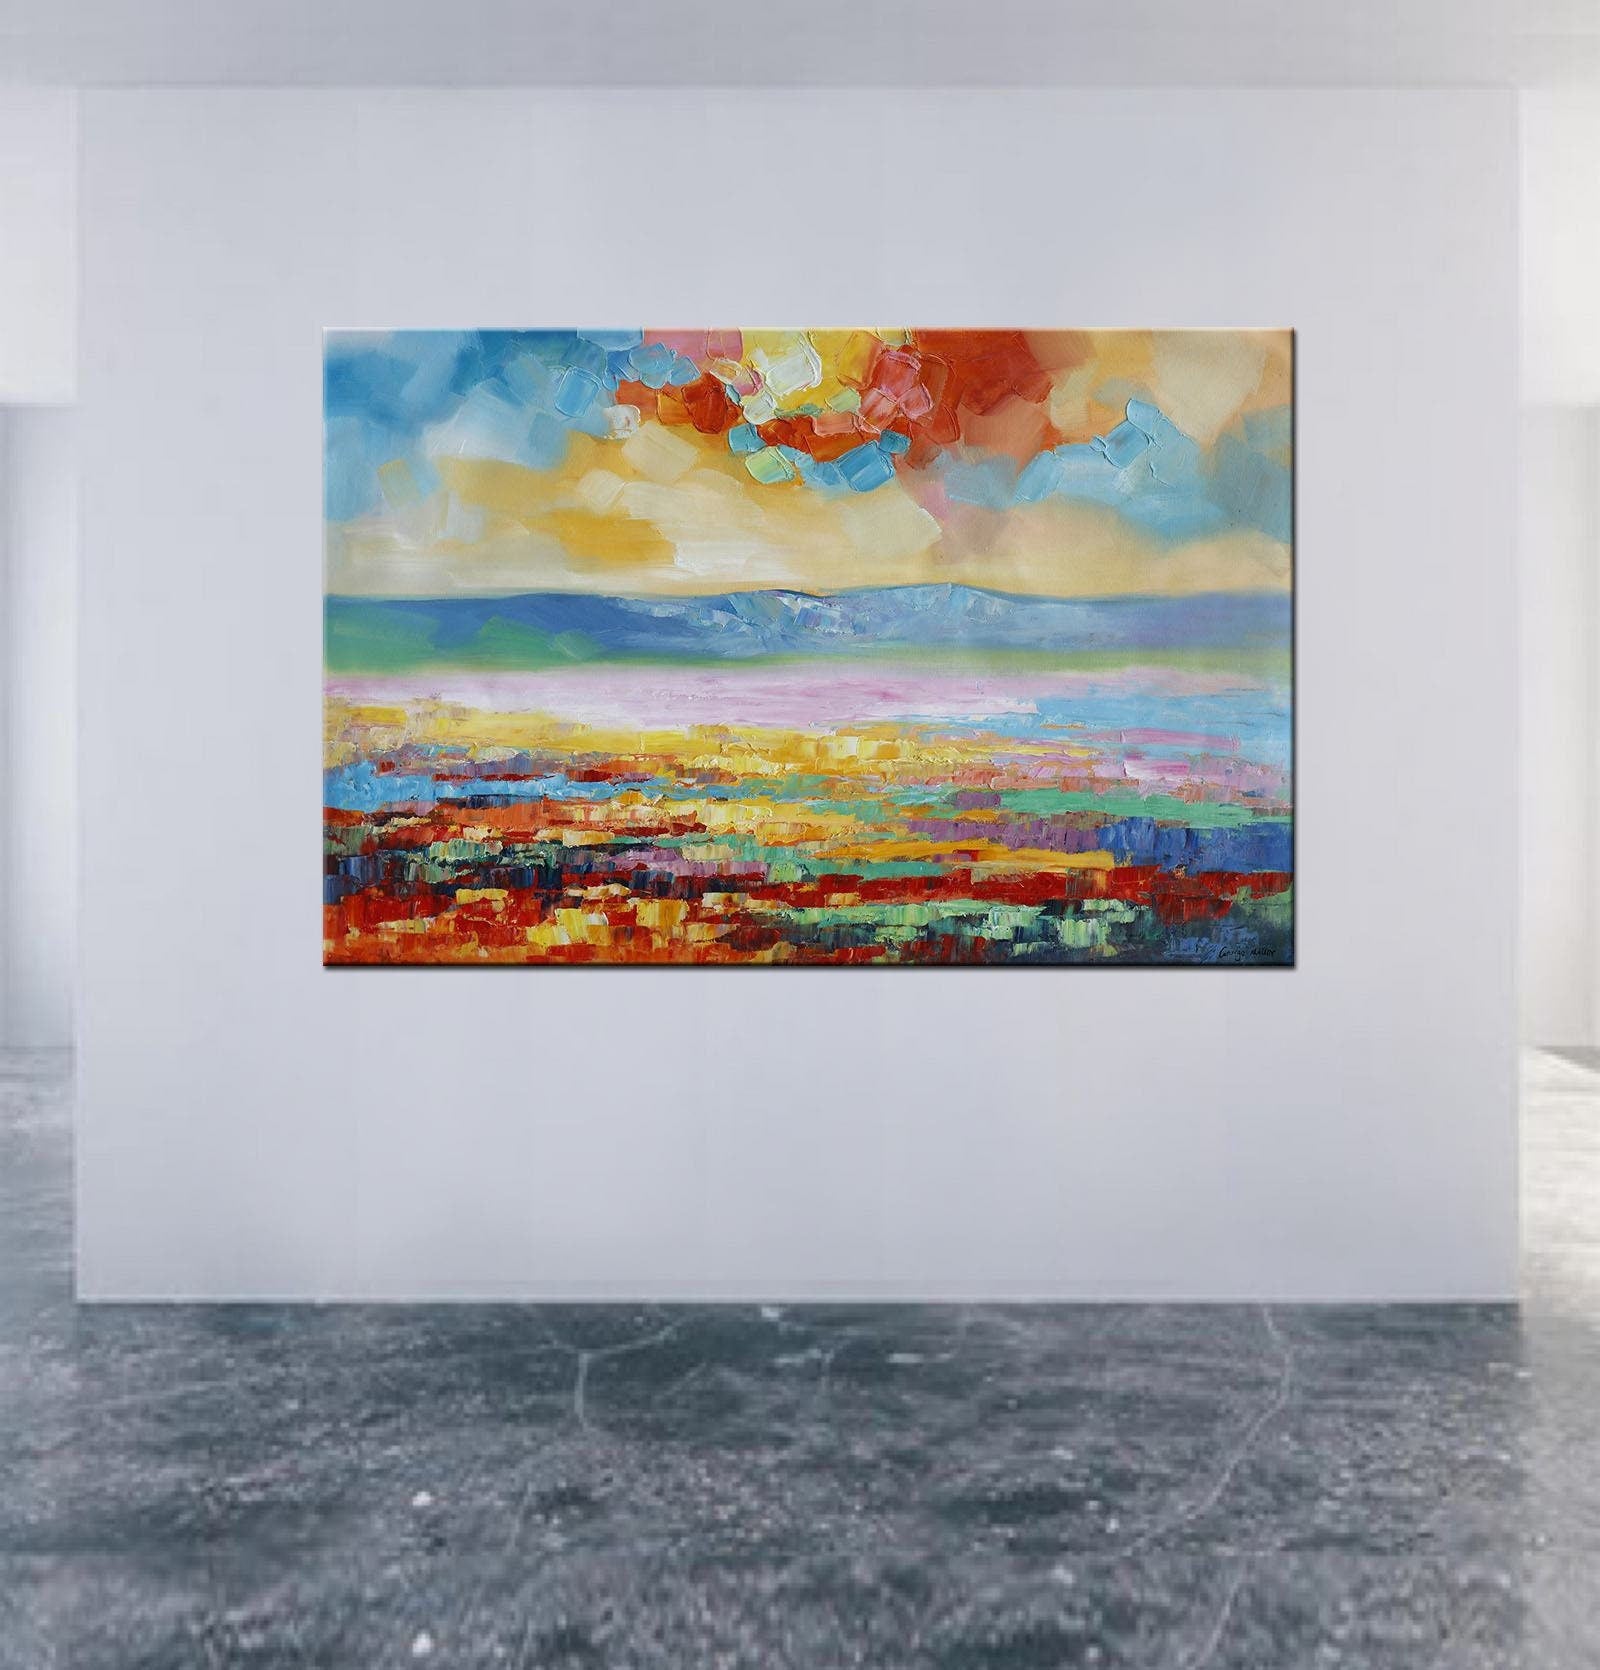 Abstract Landscape Oil Painting, Canvas Painting, Oil On Canvas Painting, Landscape, Large Painting, Handmade, Contemporary Art, Textured